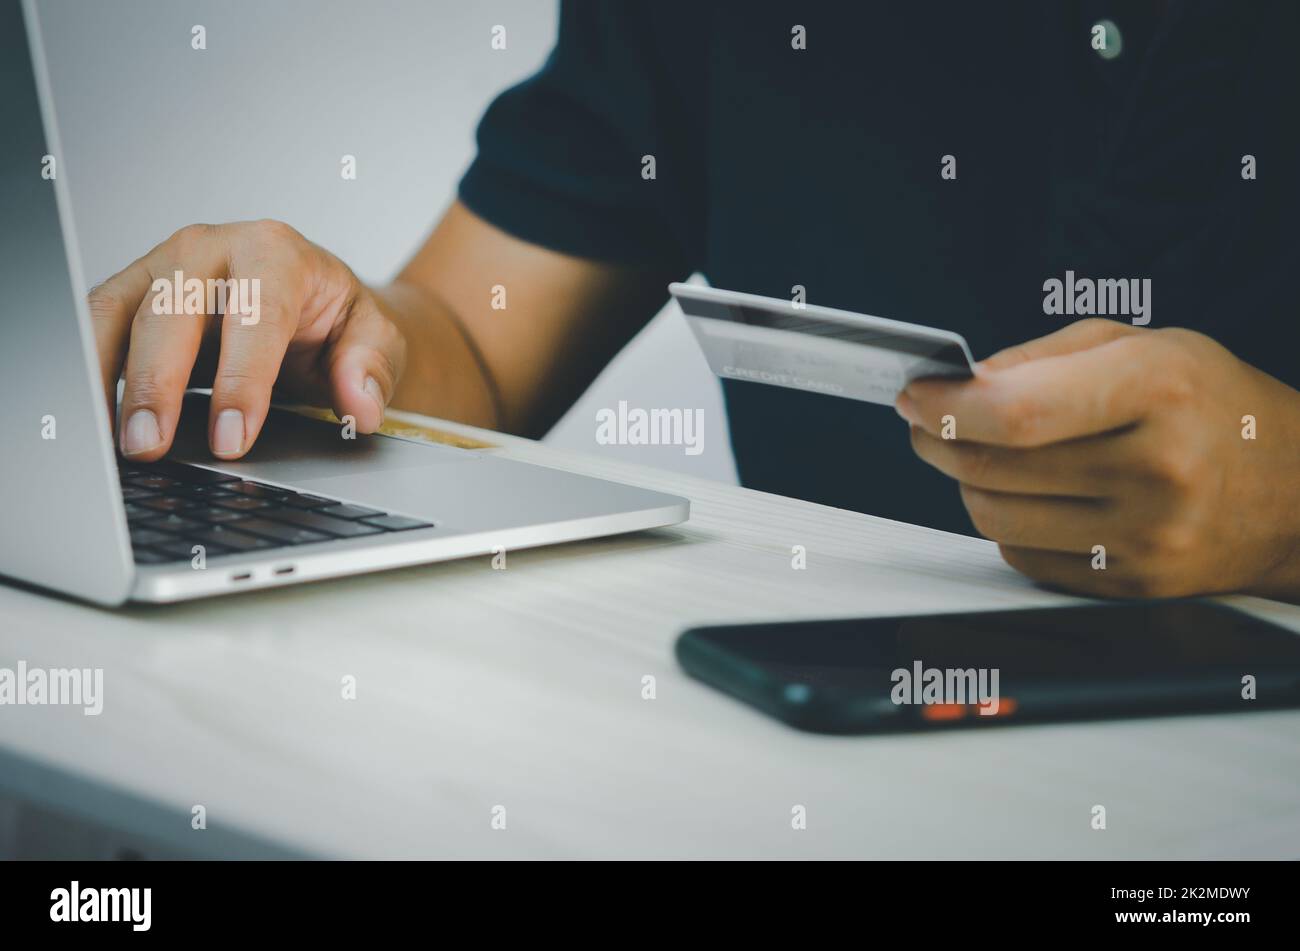 male hands on computer keyboard doing financial and credit card transactions or online shopping on the Internet. Stock Photo